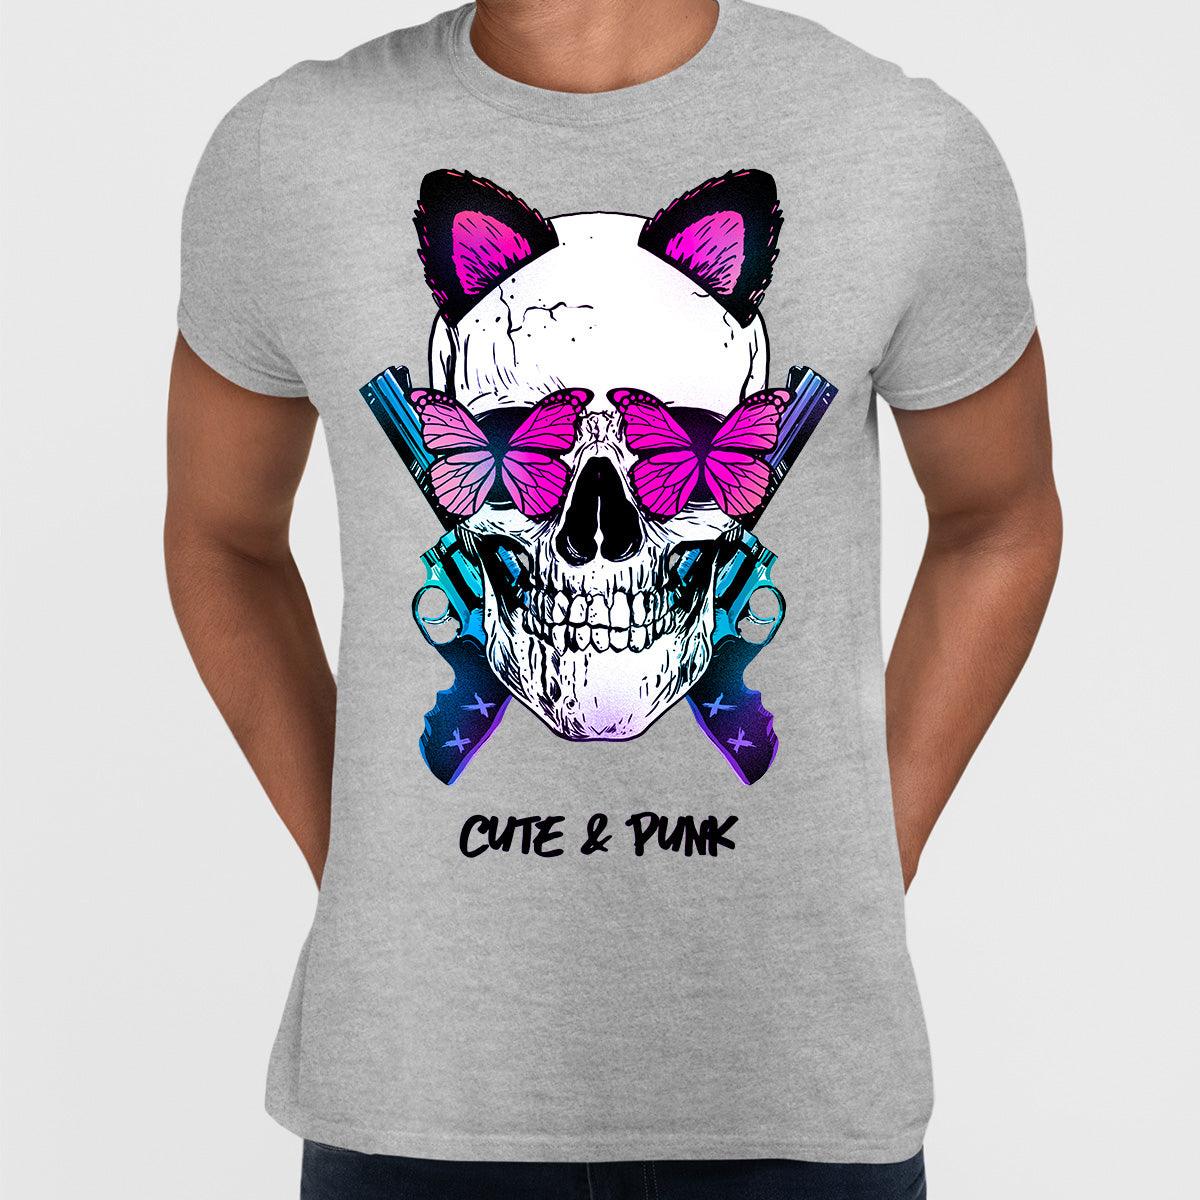 Cute Bunny Ears Skull T-shirts with an Attitude For men and women - Kuzi Tees